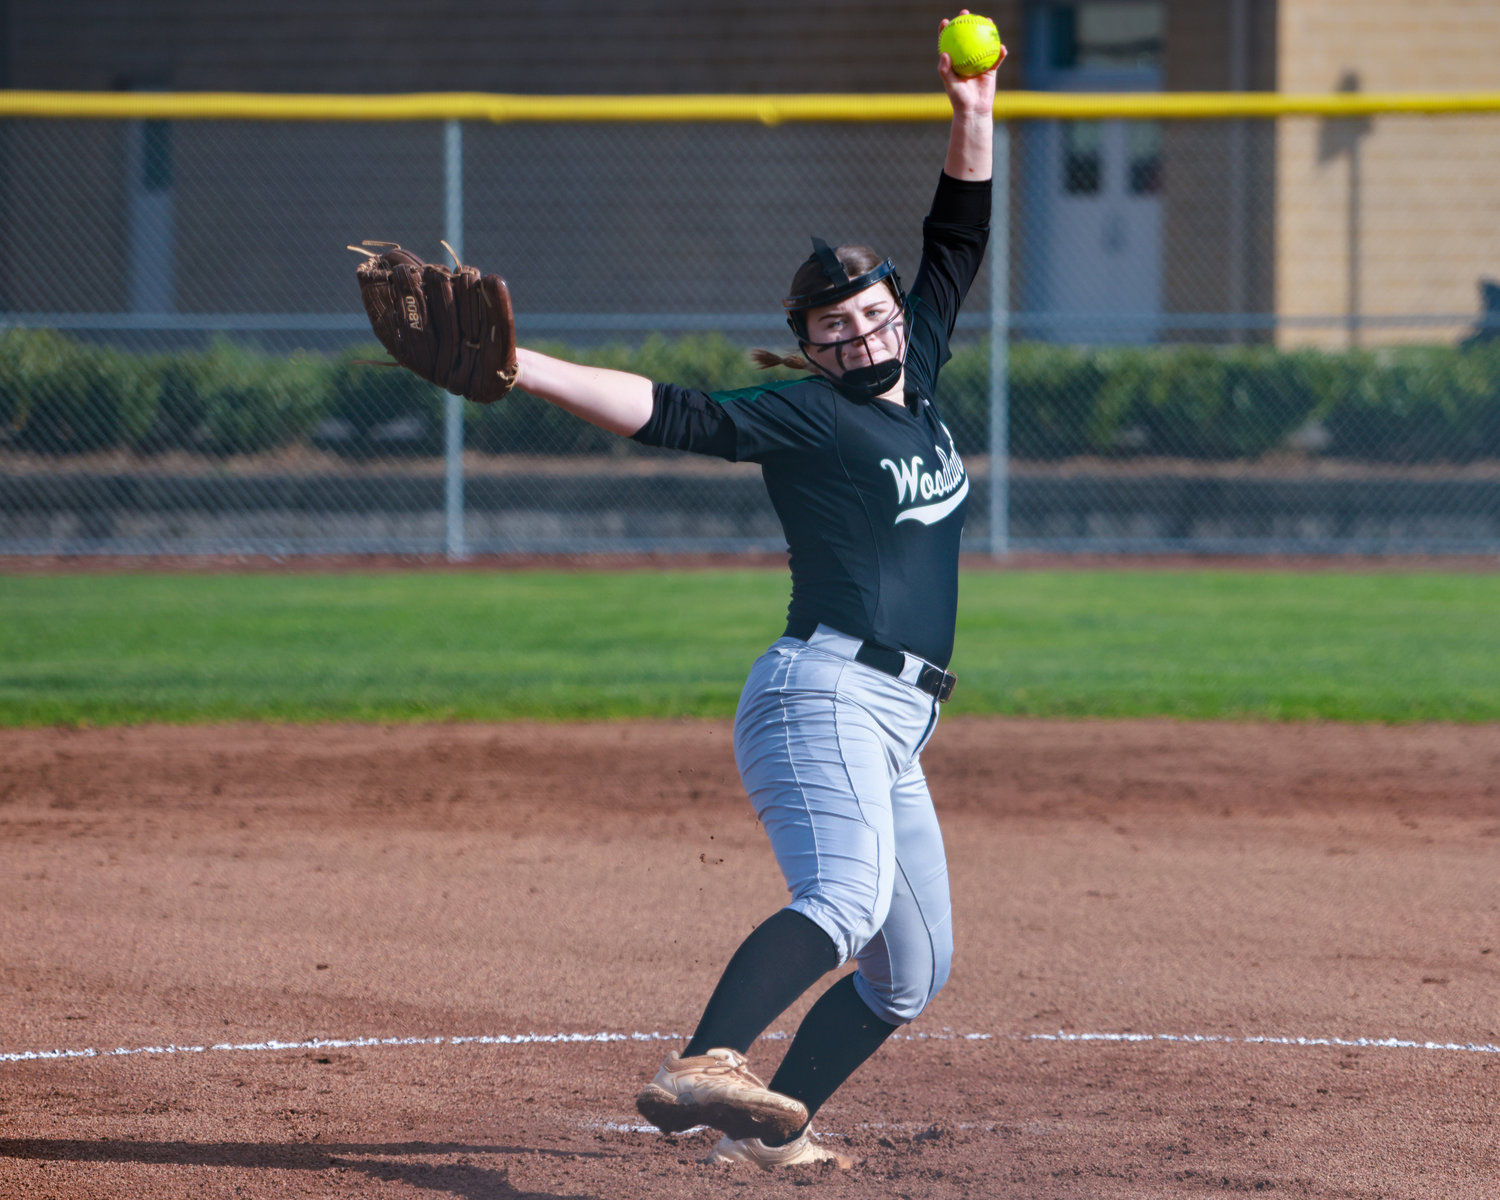 Gracelynn Huffman, Woodland's starting pitcher, winds up a pitch during Woodland's loss to Kelso on Wednesday, March 29.